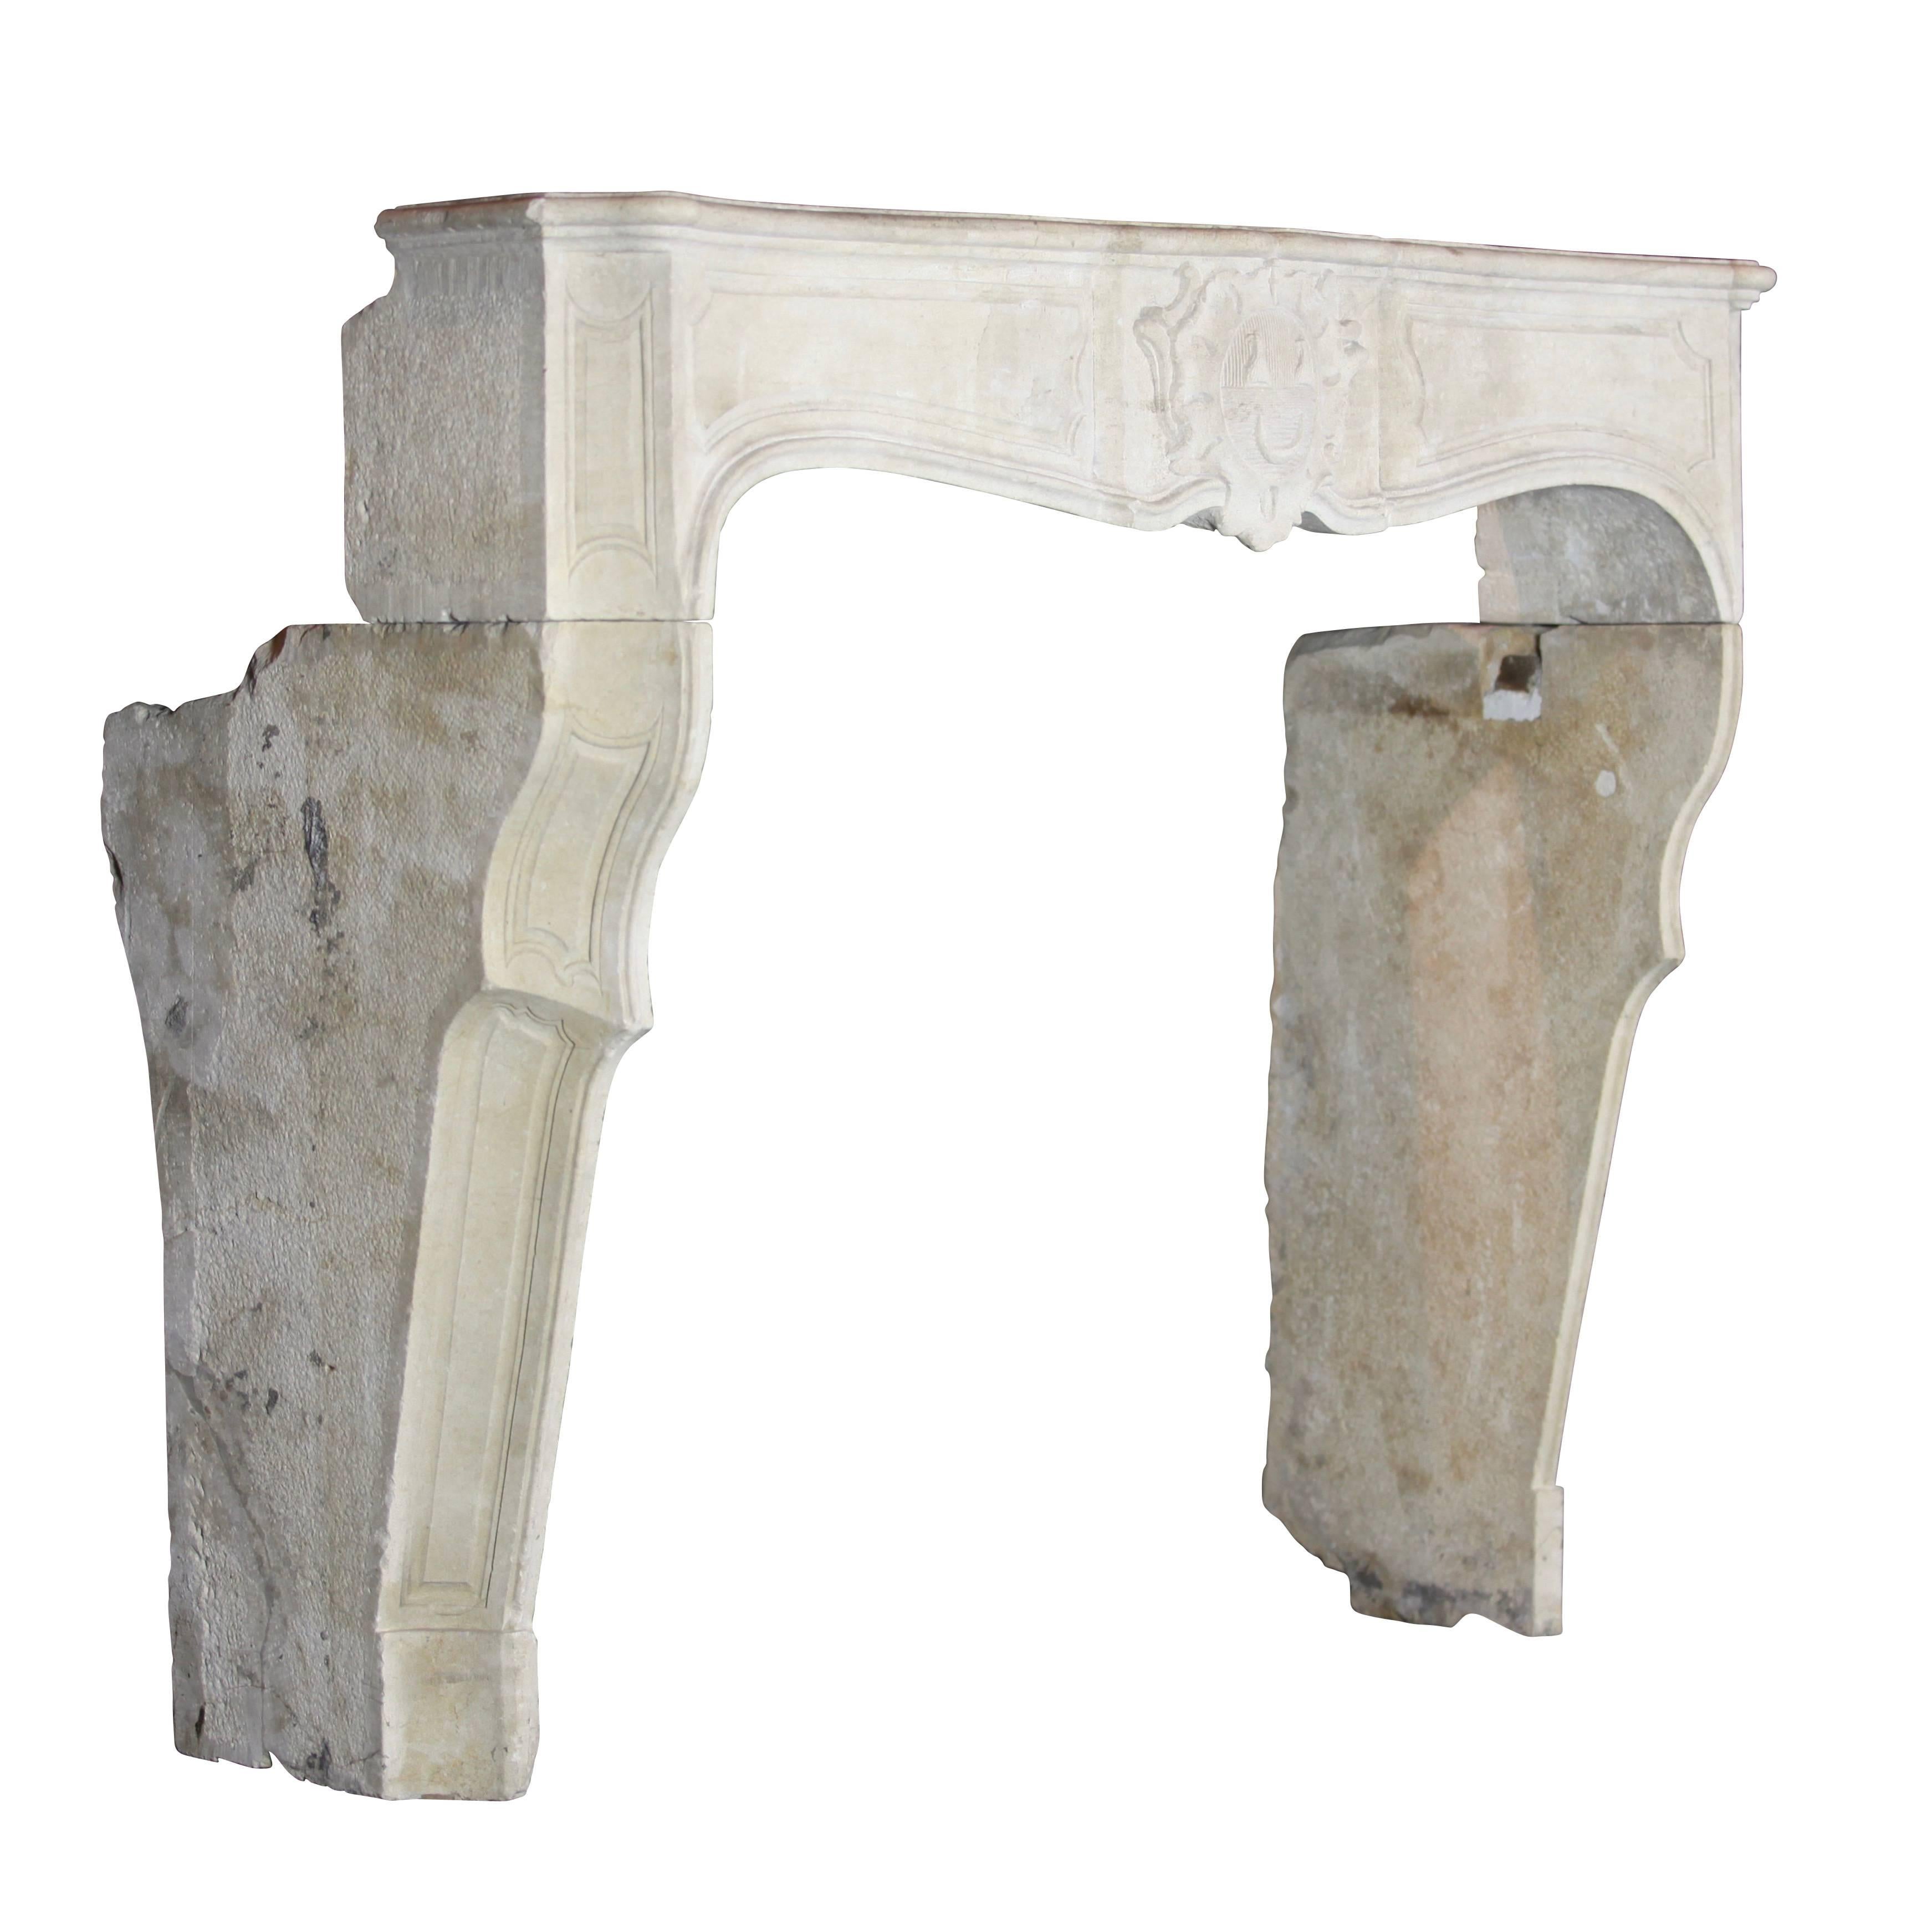 This again is a fabulous original antique fireplace surround in limestone. The central cartouche on the front holds a family crest of a nobilli. The movement in the jambs brings an extra elegancy to it. A perfect match for a small firebox. This